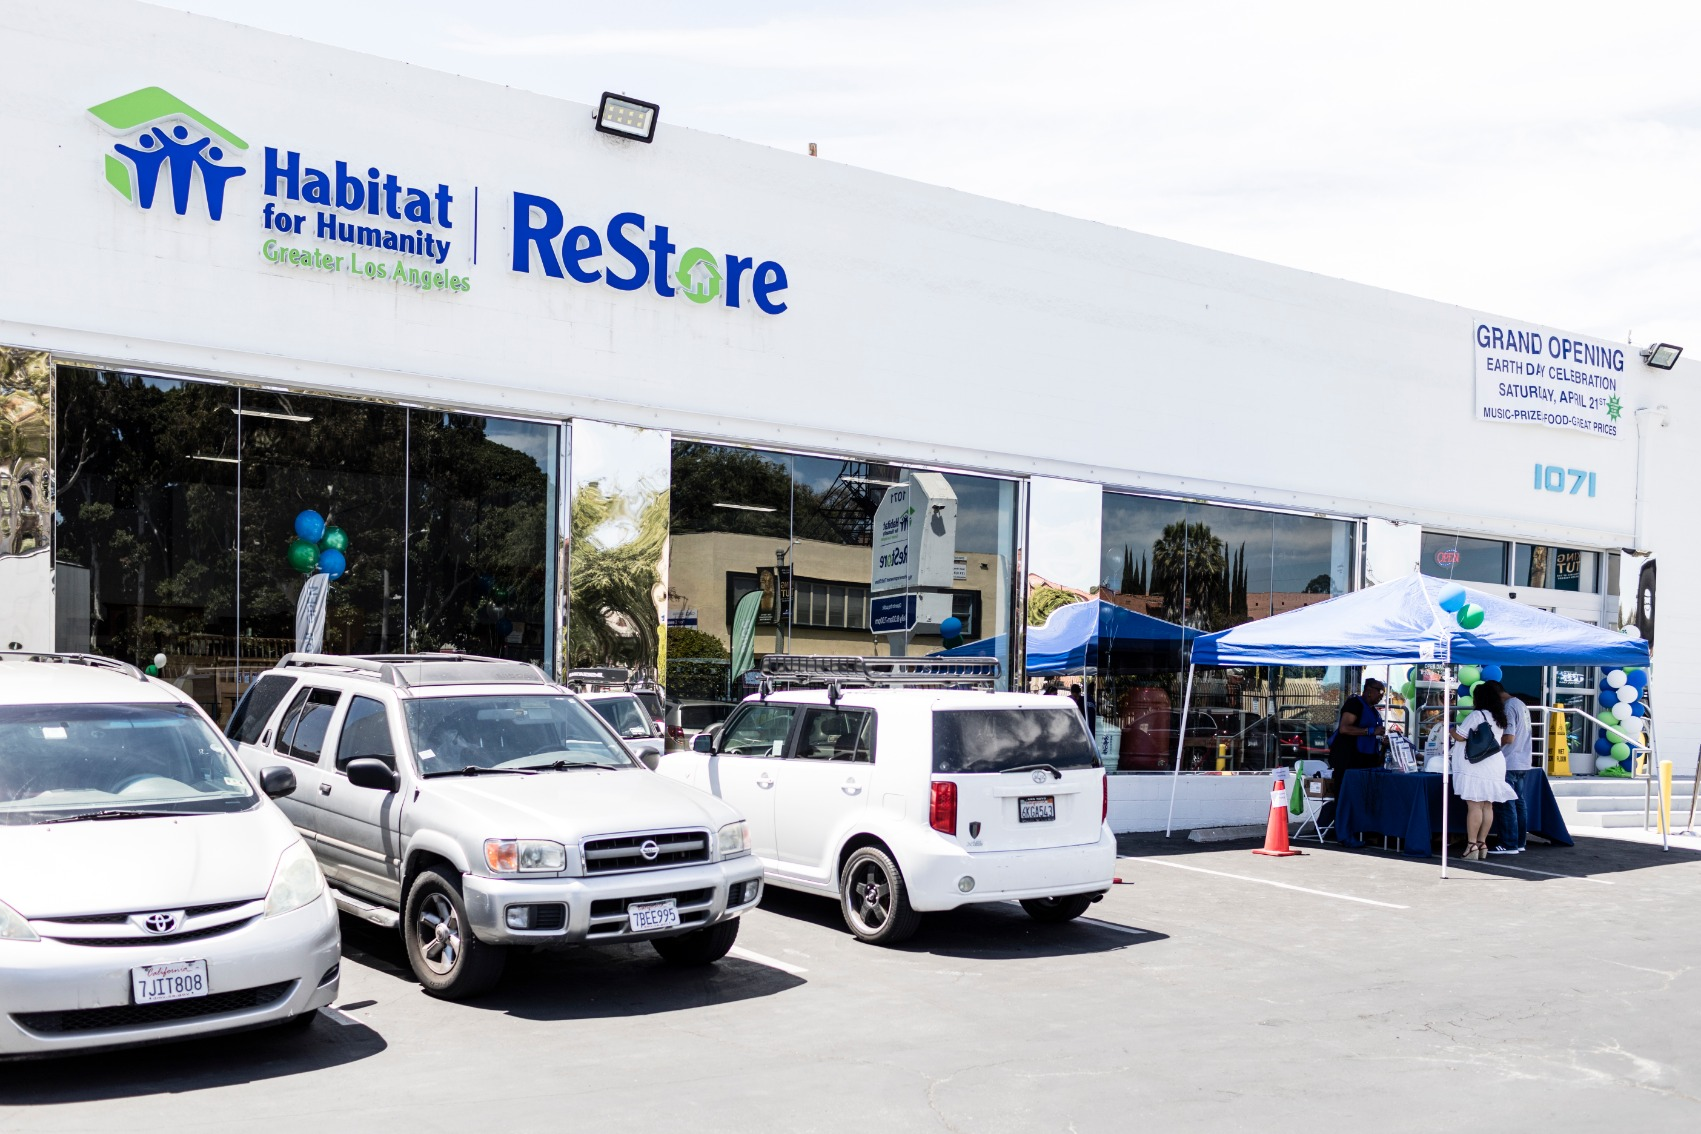 Habitat for Humanity of Greater Los Angeles ReStore Photo